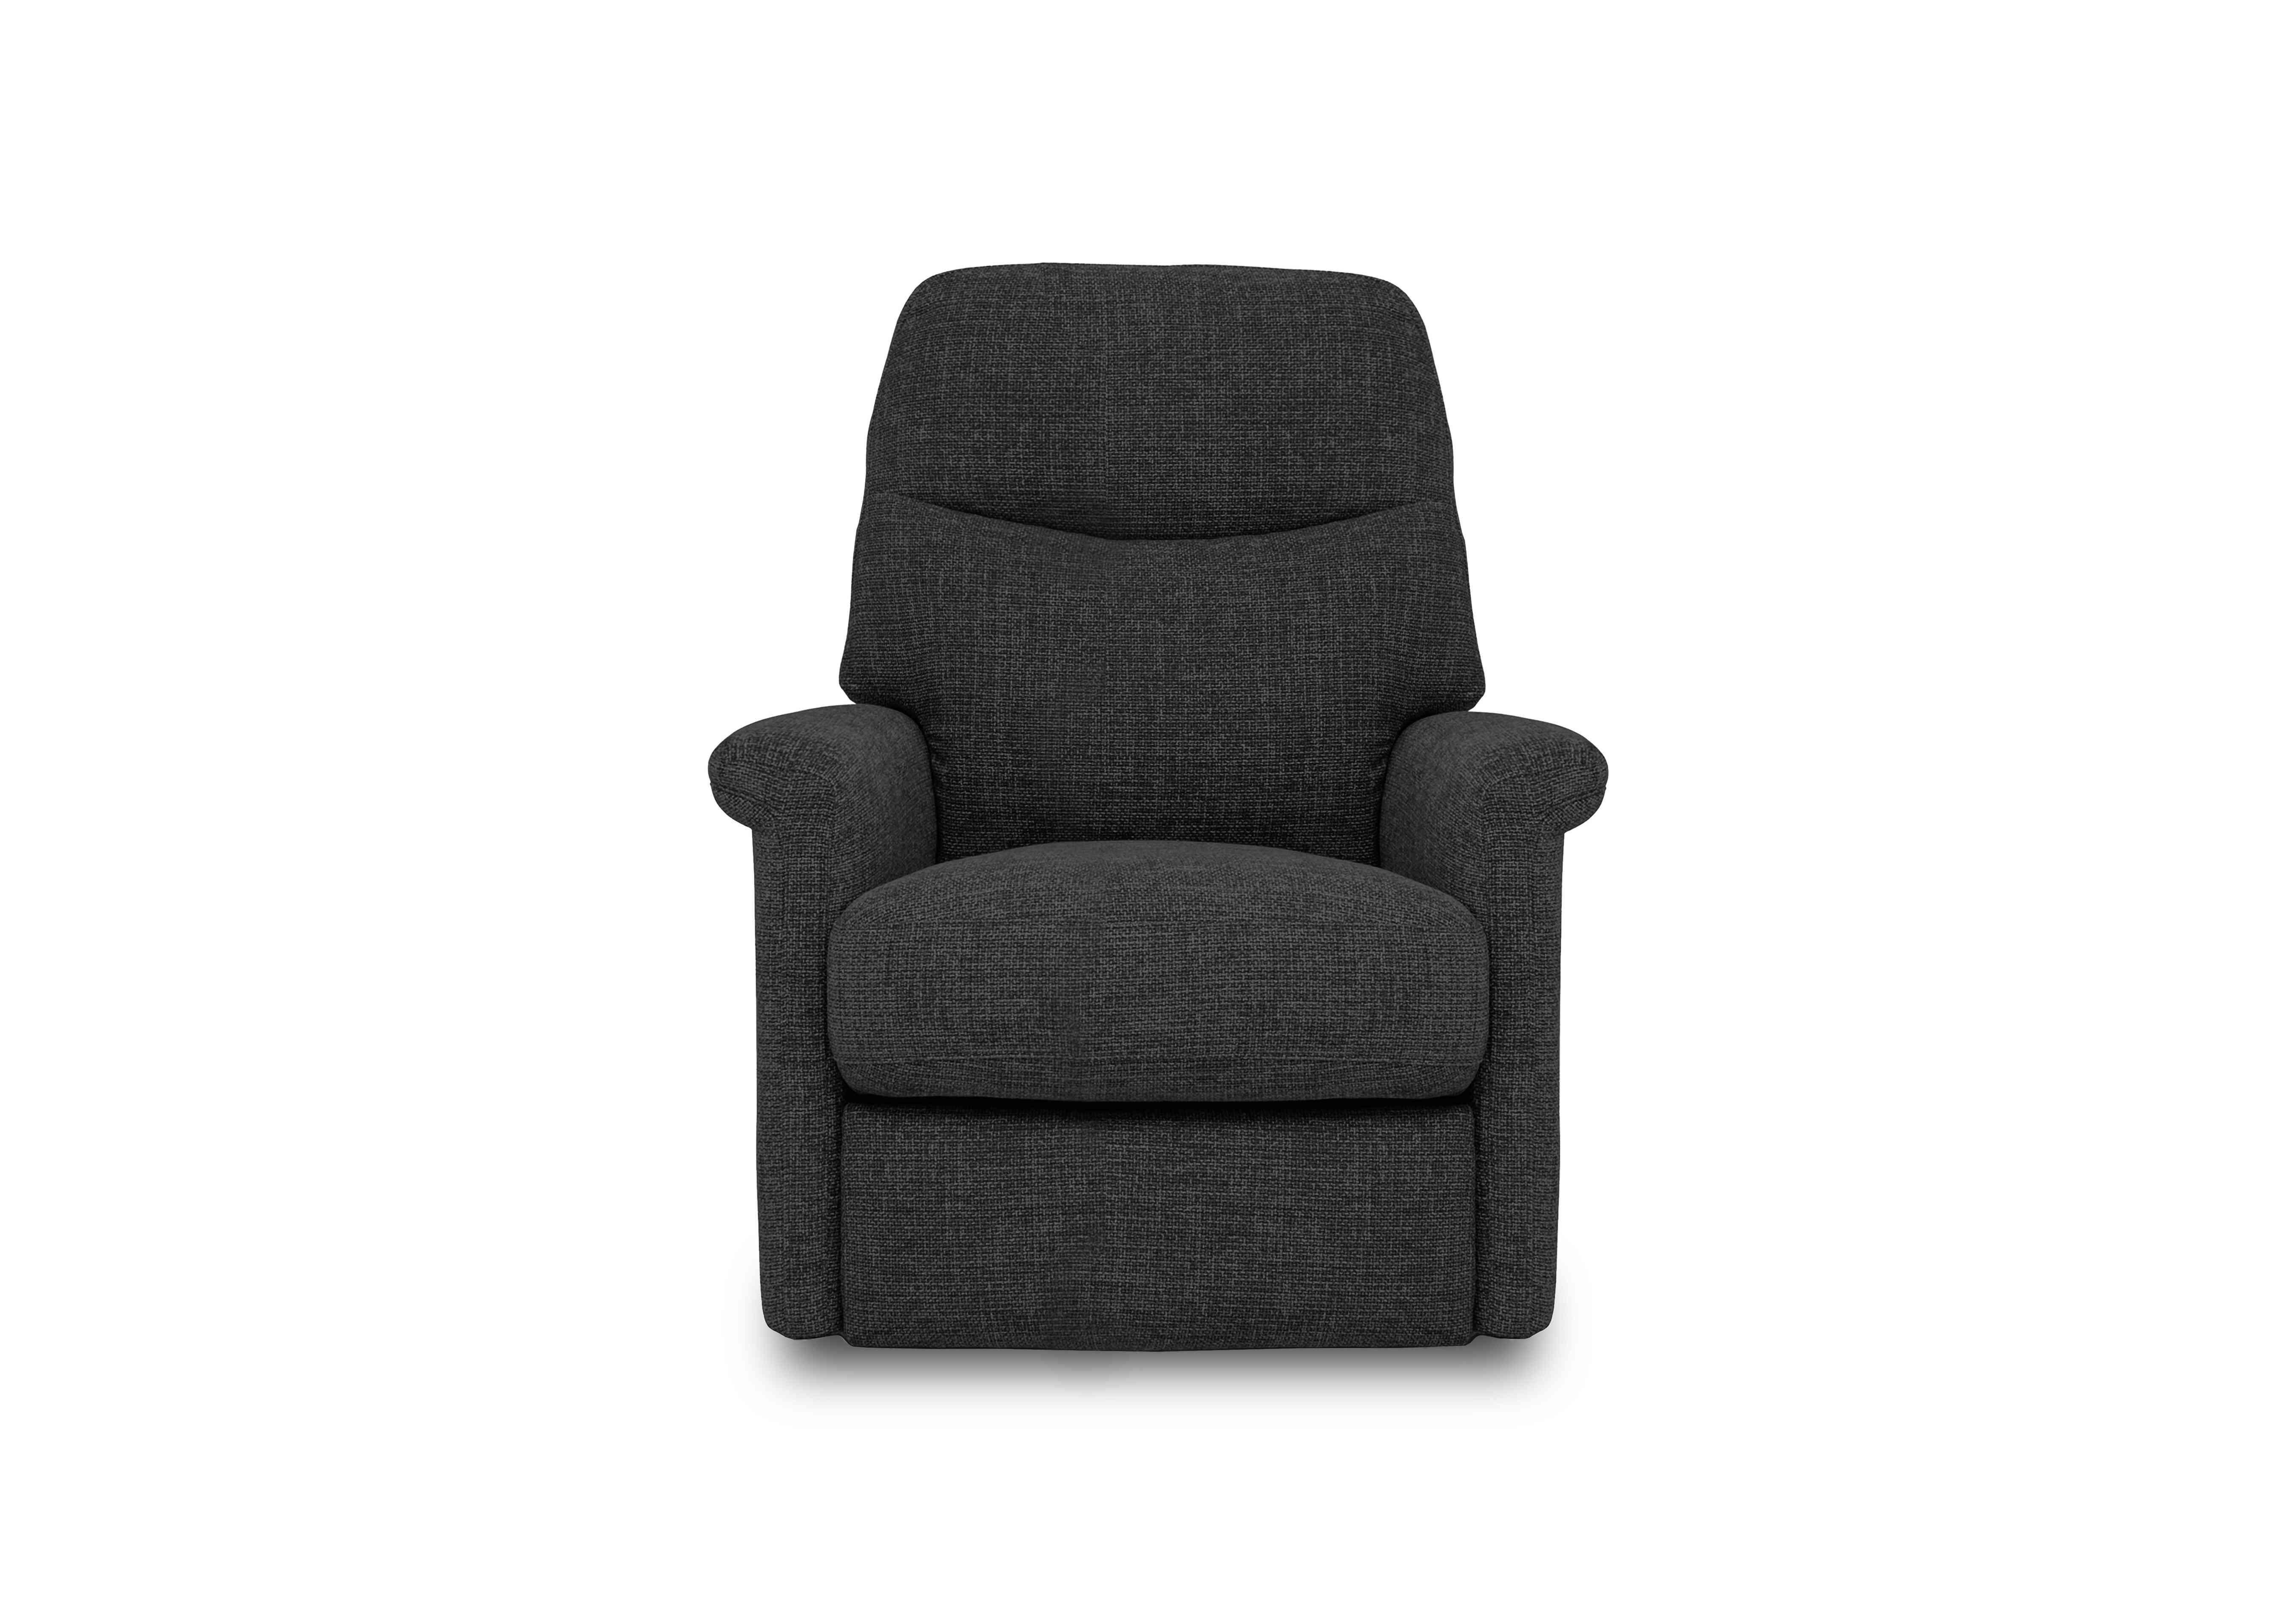 Compact Collection Lille Fabric Chair in Fab-Cac-R463 Black Mica on Furniture Village